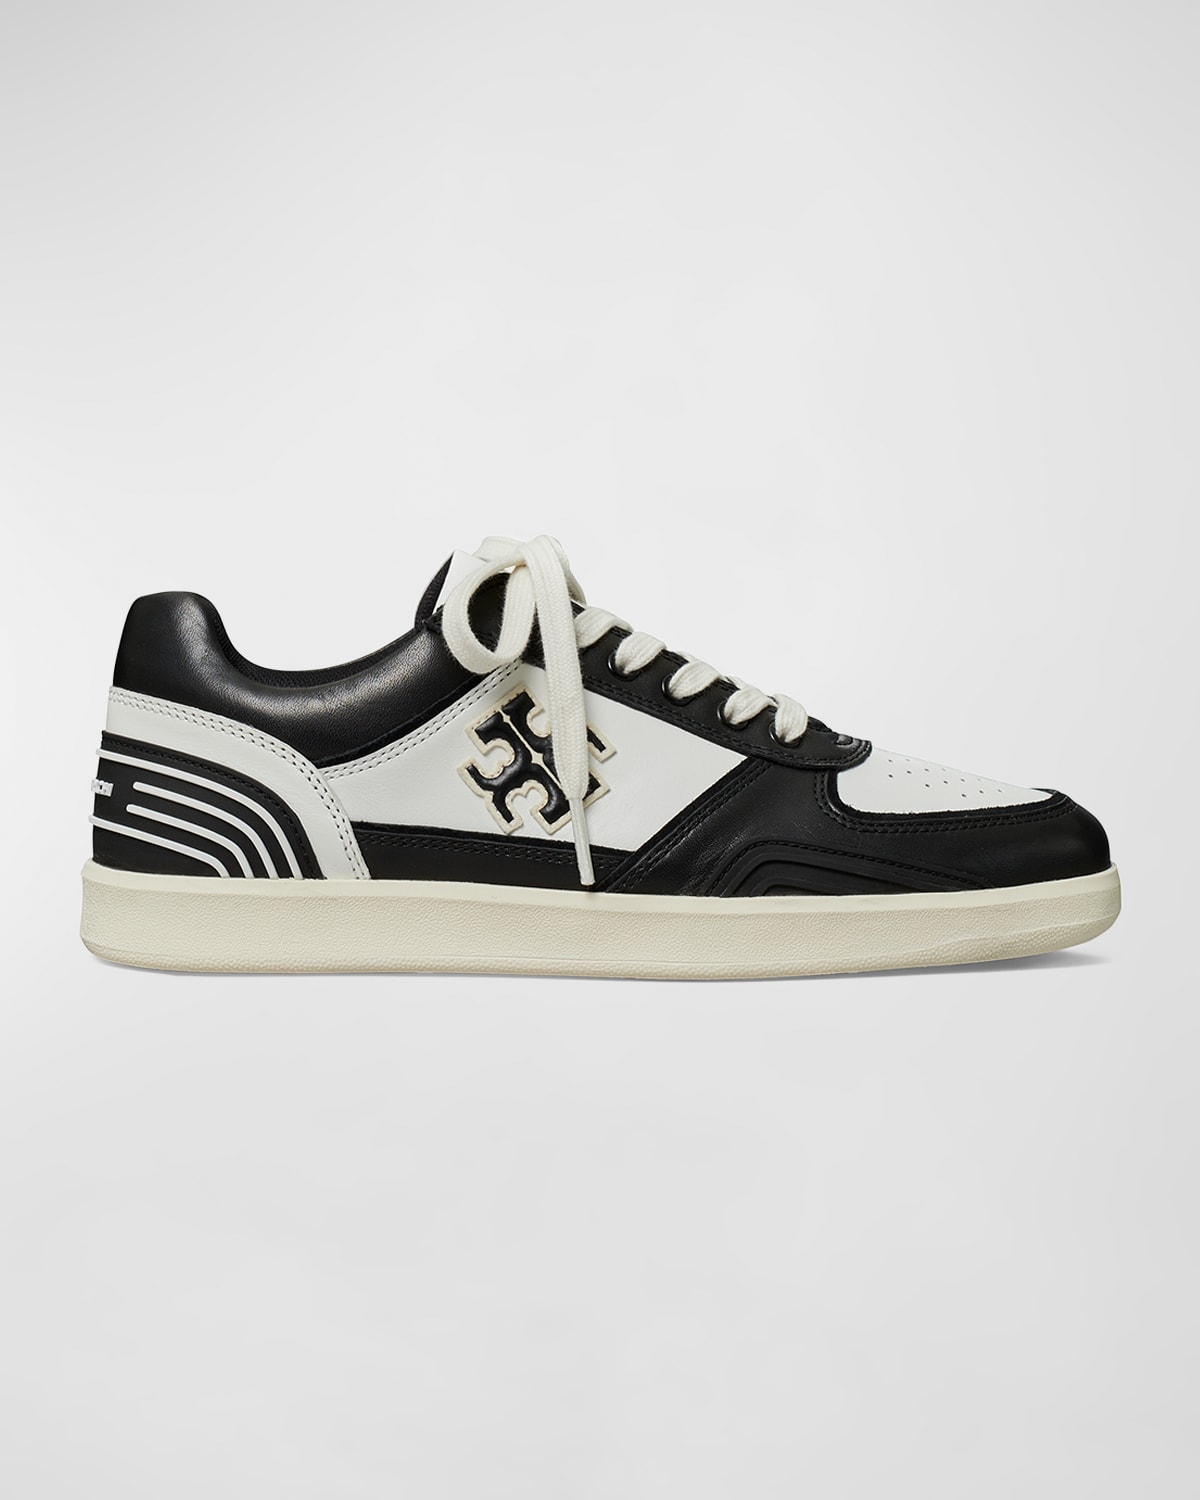 Tory Burch Clover Leather Low-top Sneakers In Purity / Perfect Black / Perfect Black